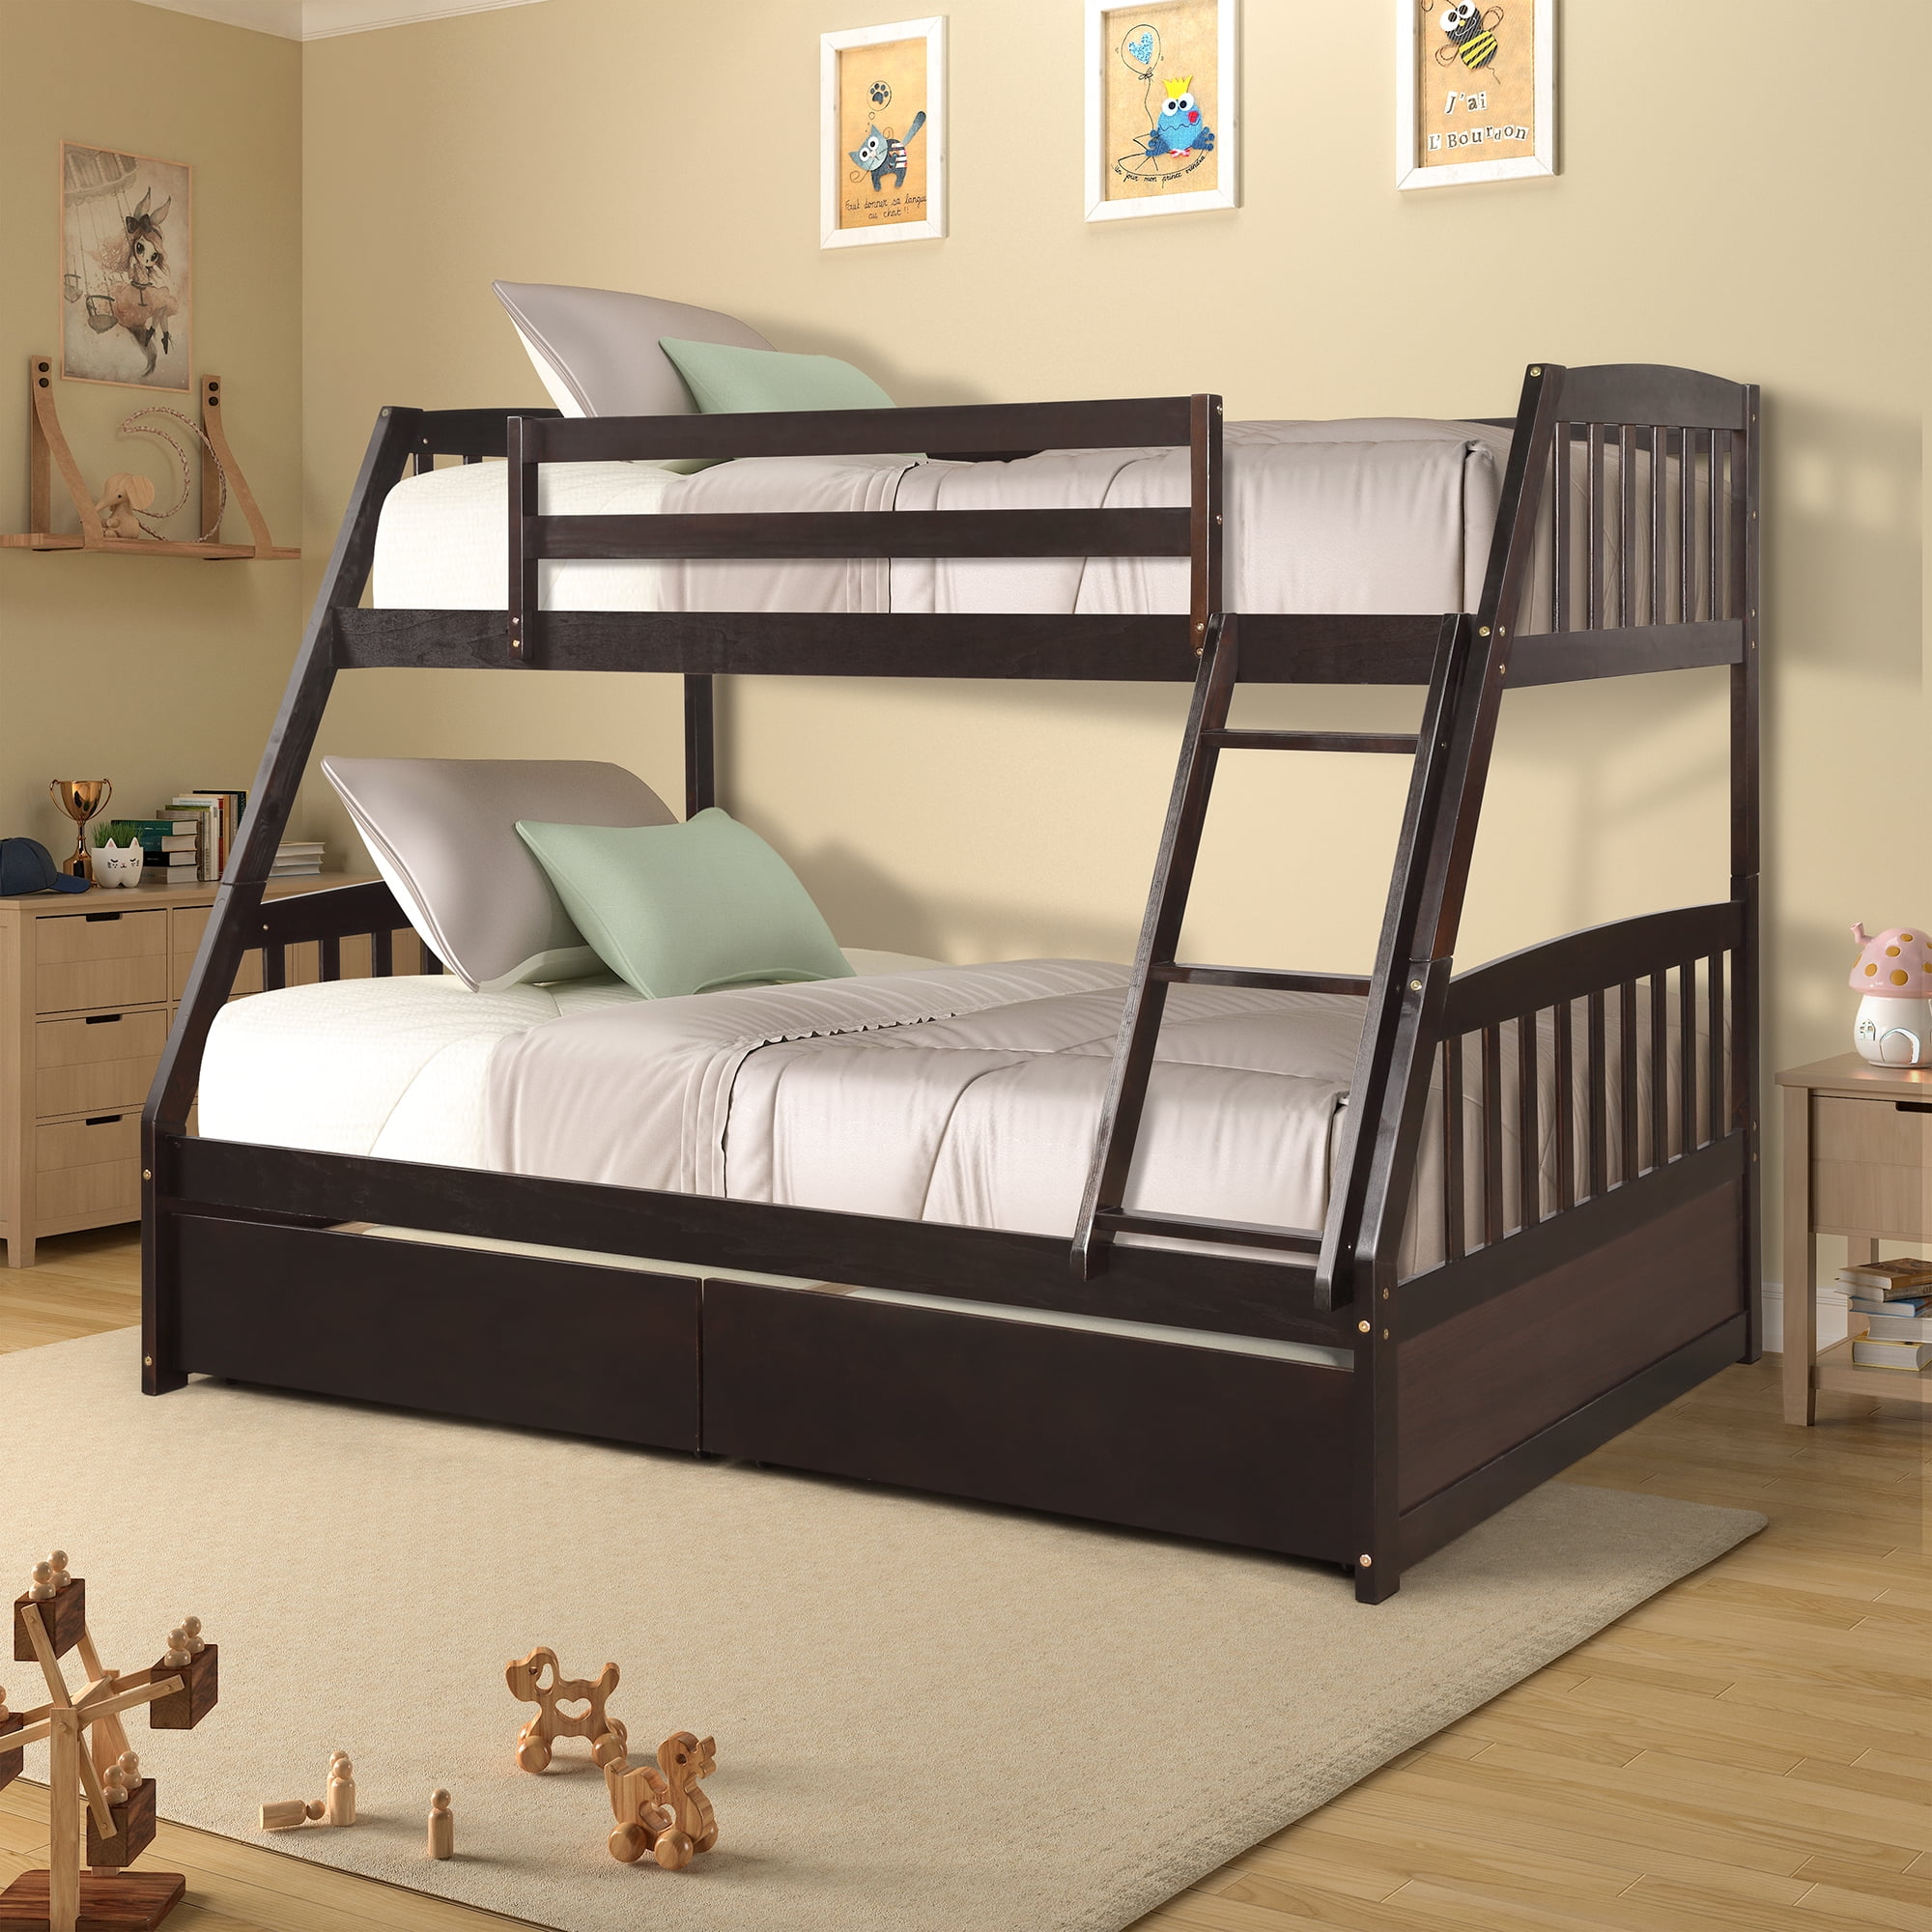 Kids Twin Over Full Bunk Beds Solid, Boy Girl Bunk Beds